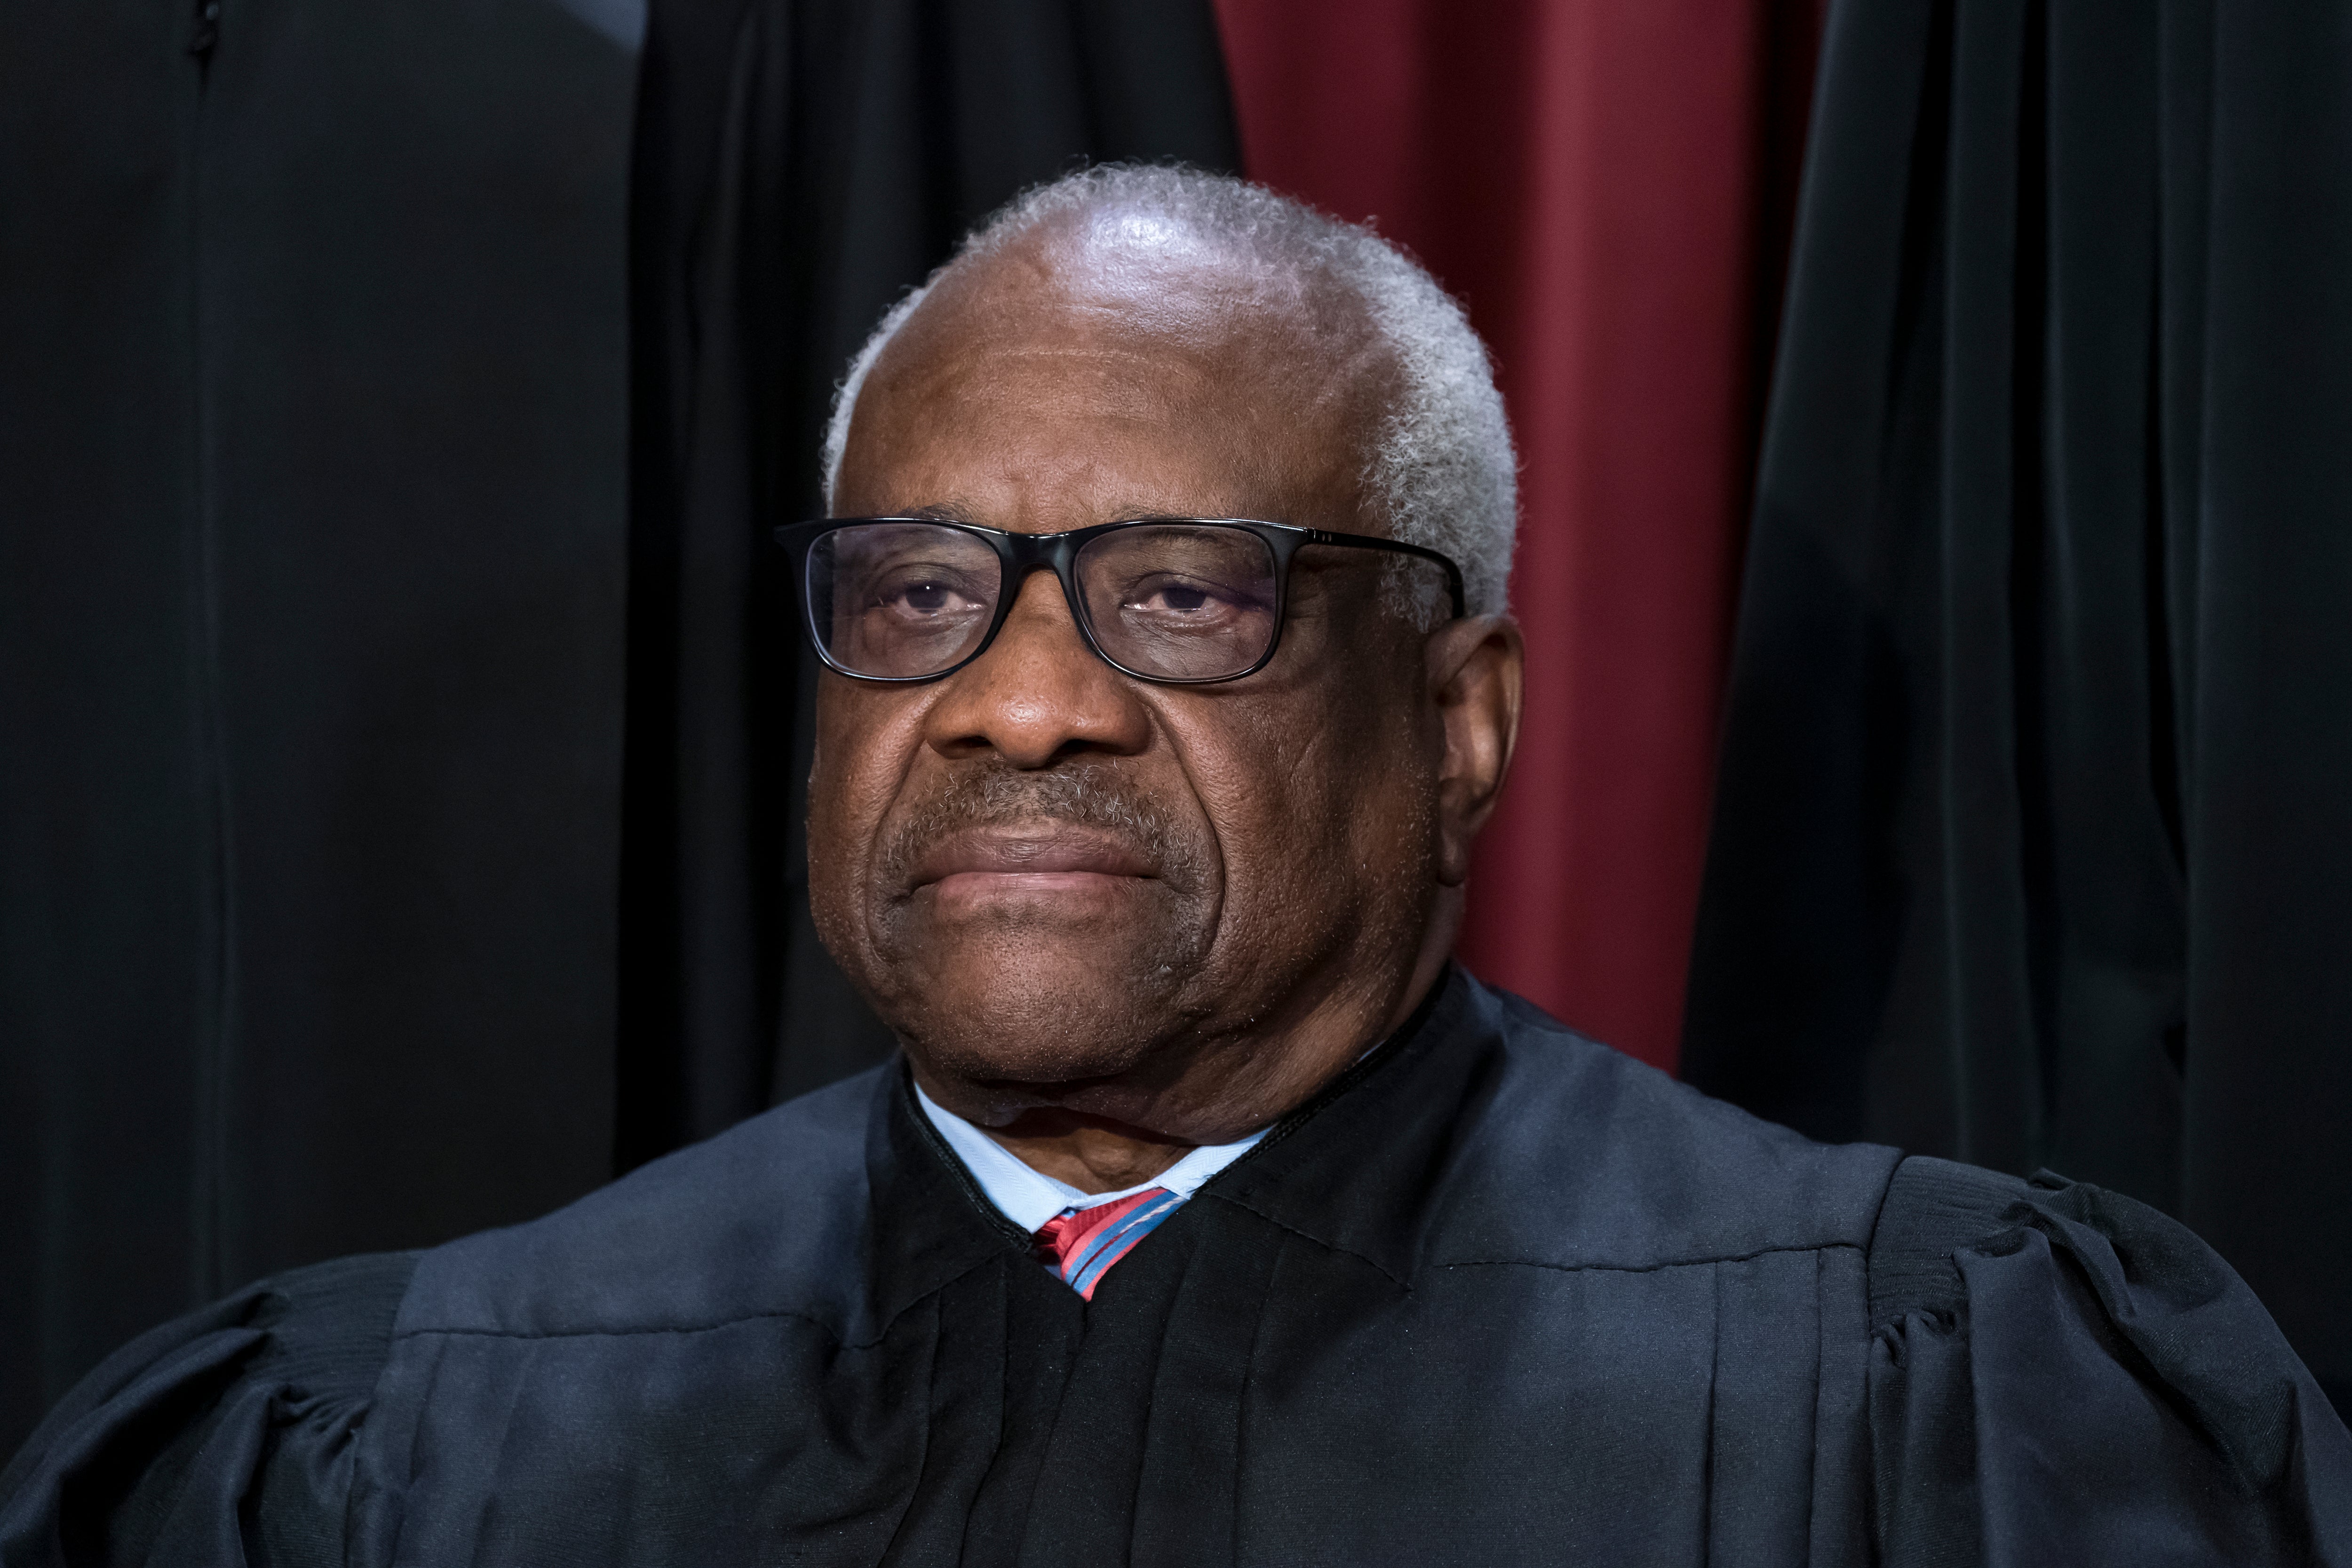 Clarence Thomas, a justice on the US Supreme Court